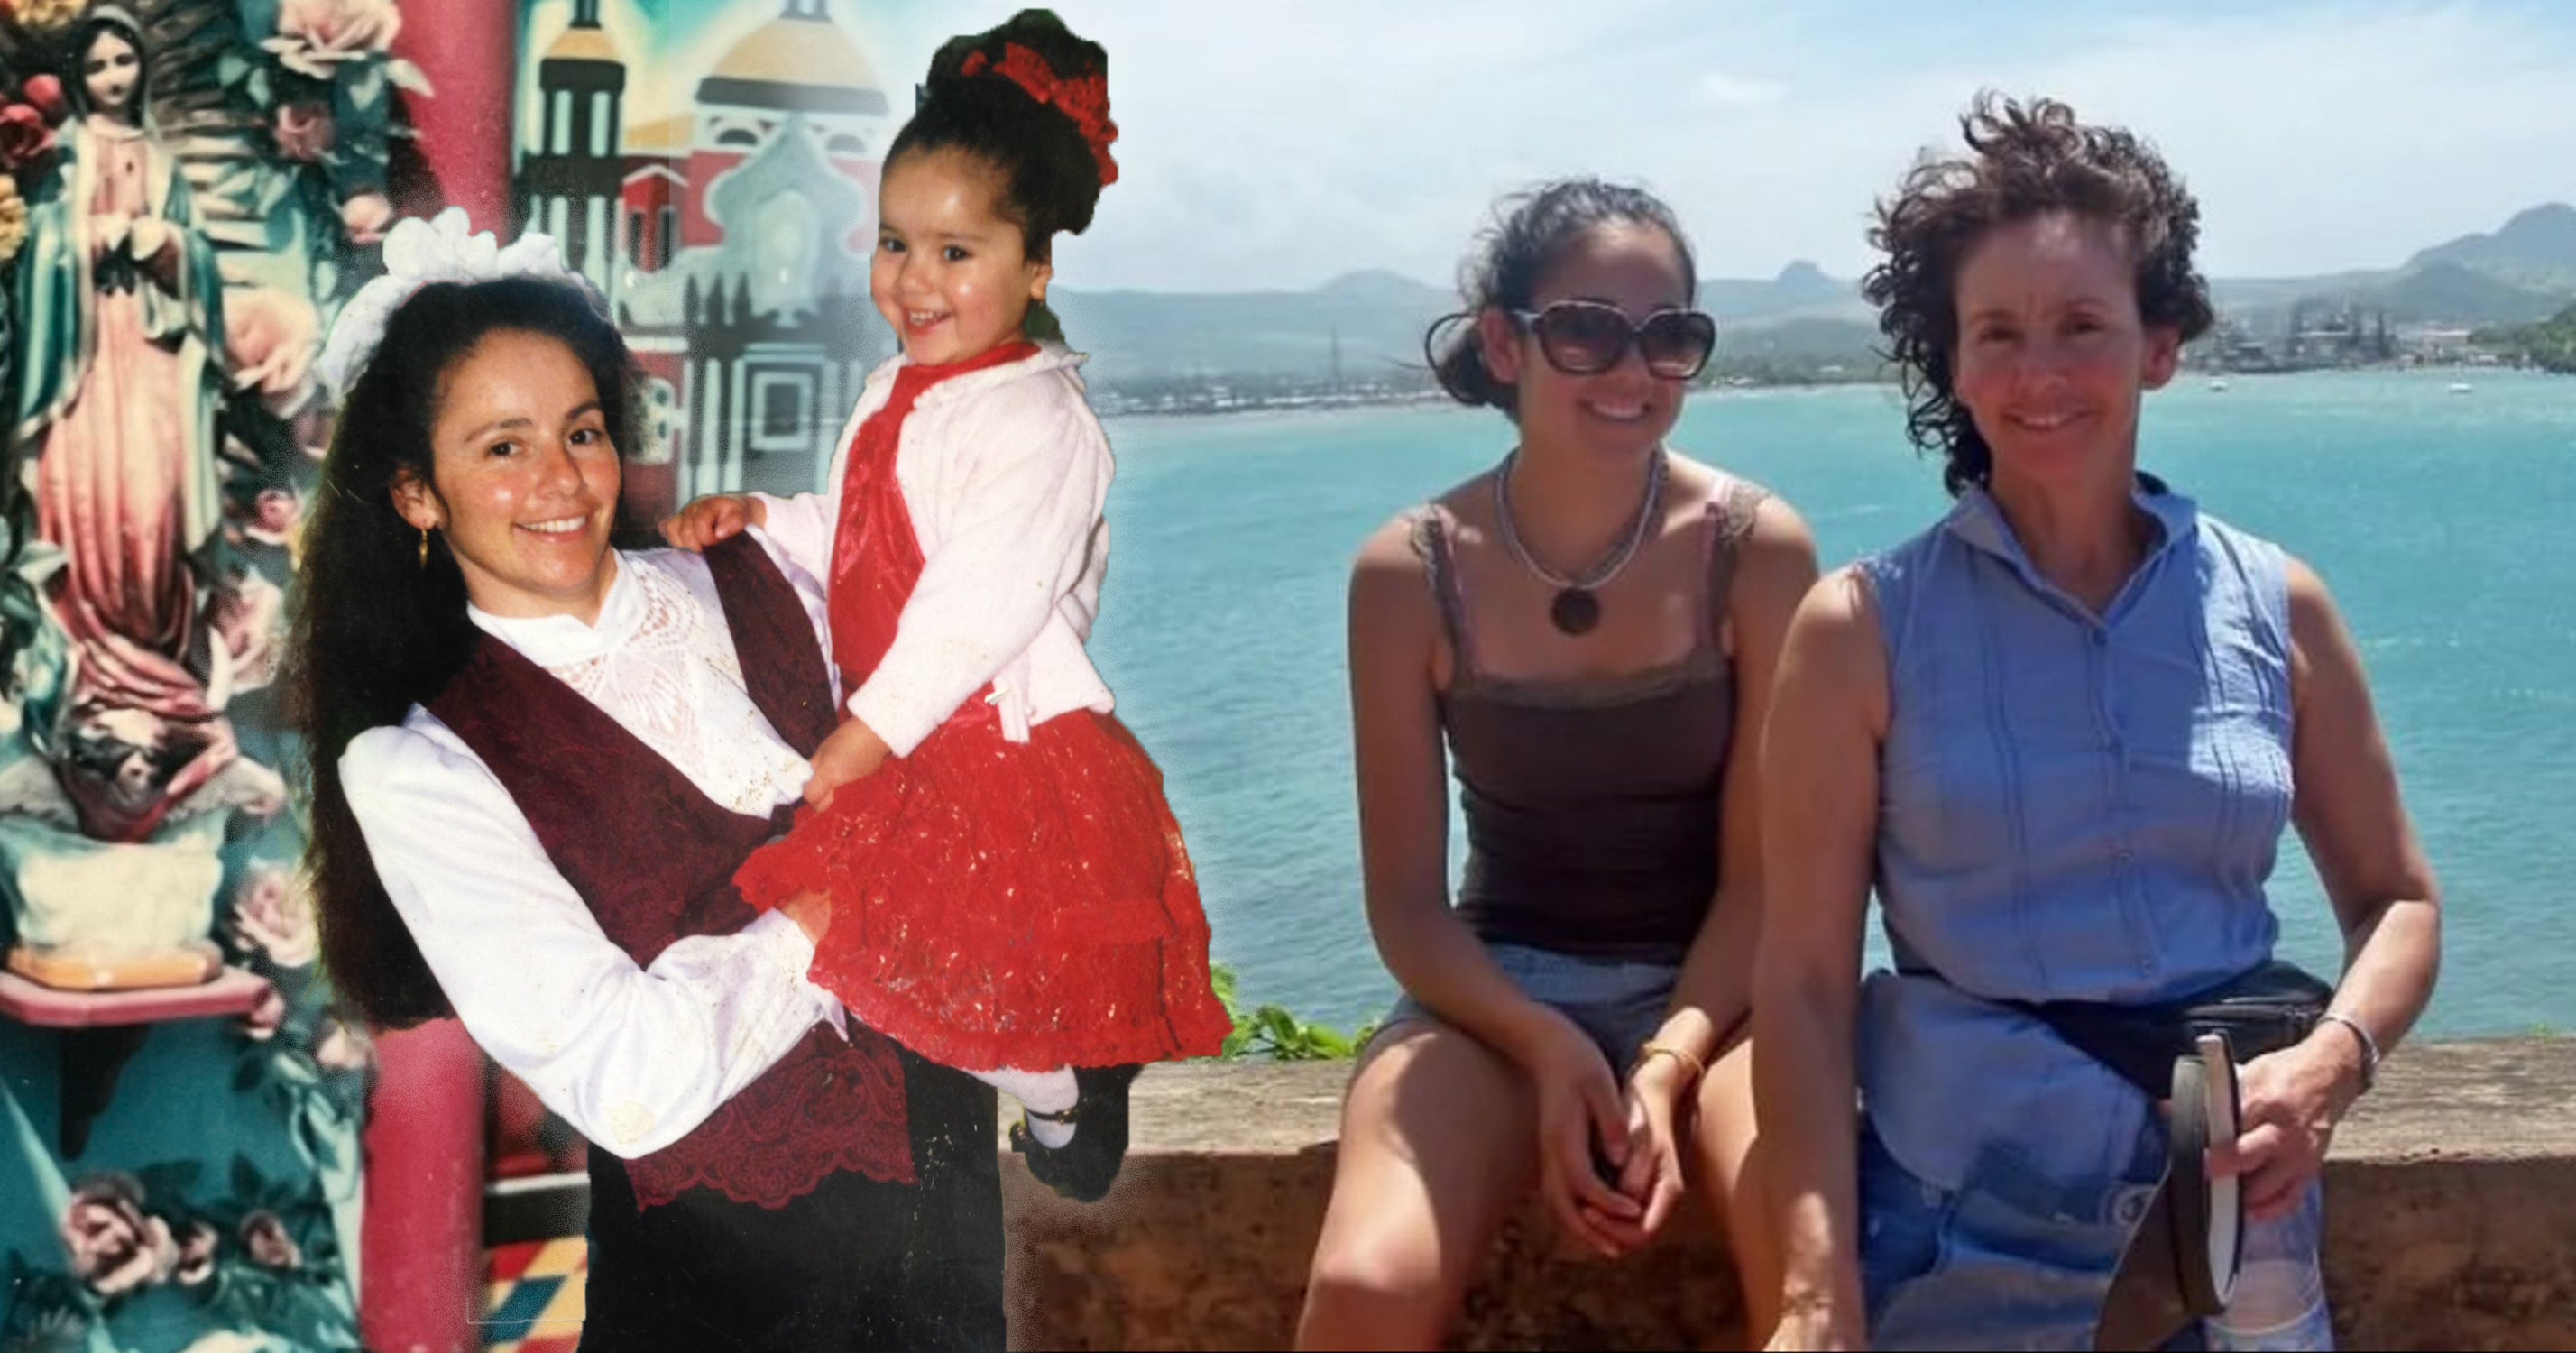 My Latina Mom Died By Suicide, But She Wasn’t Selfish